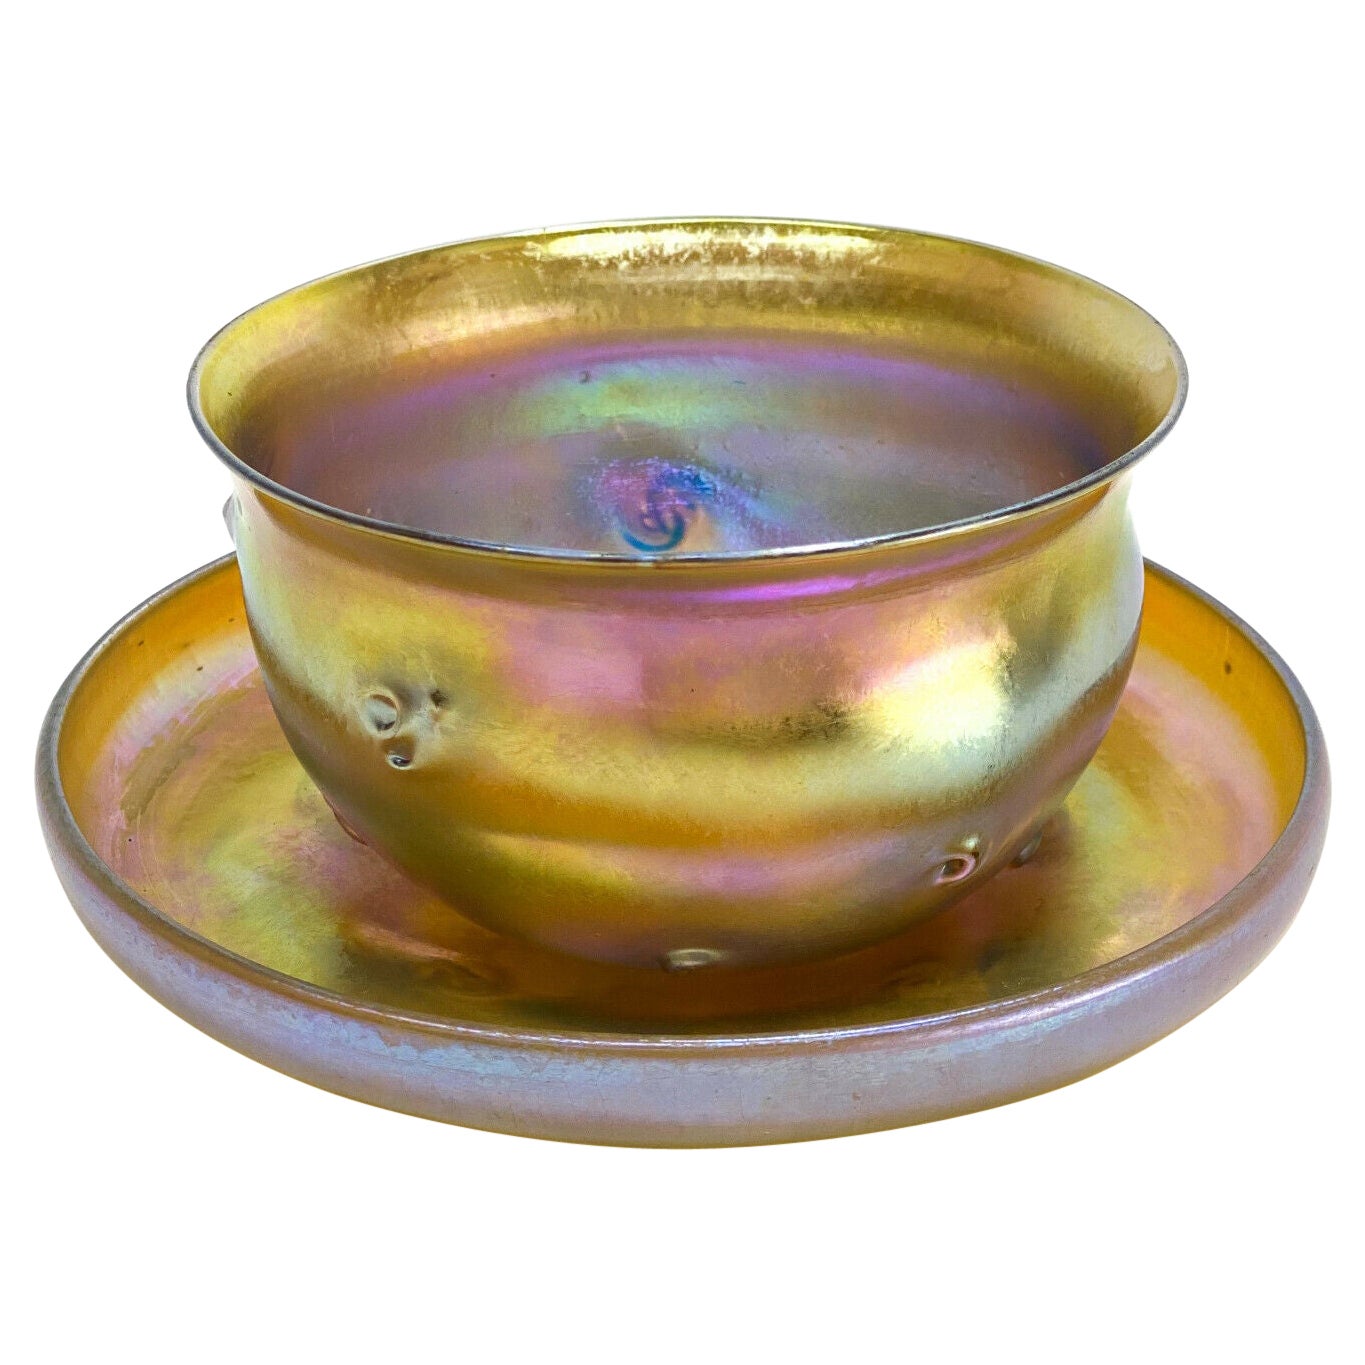 LCT Tiffany Favrile Gold Iridescent Bowl and Underplate, Prunts, circa 1900 For Sale